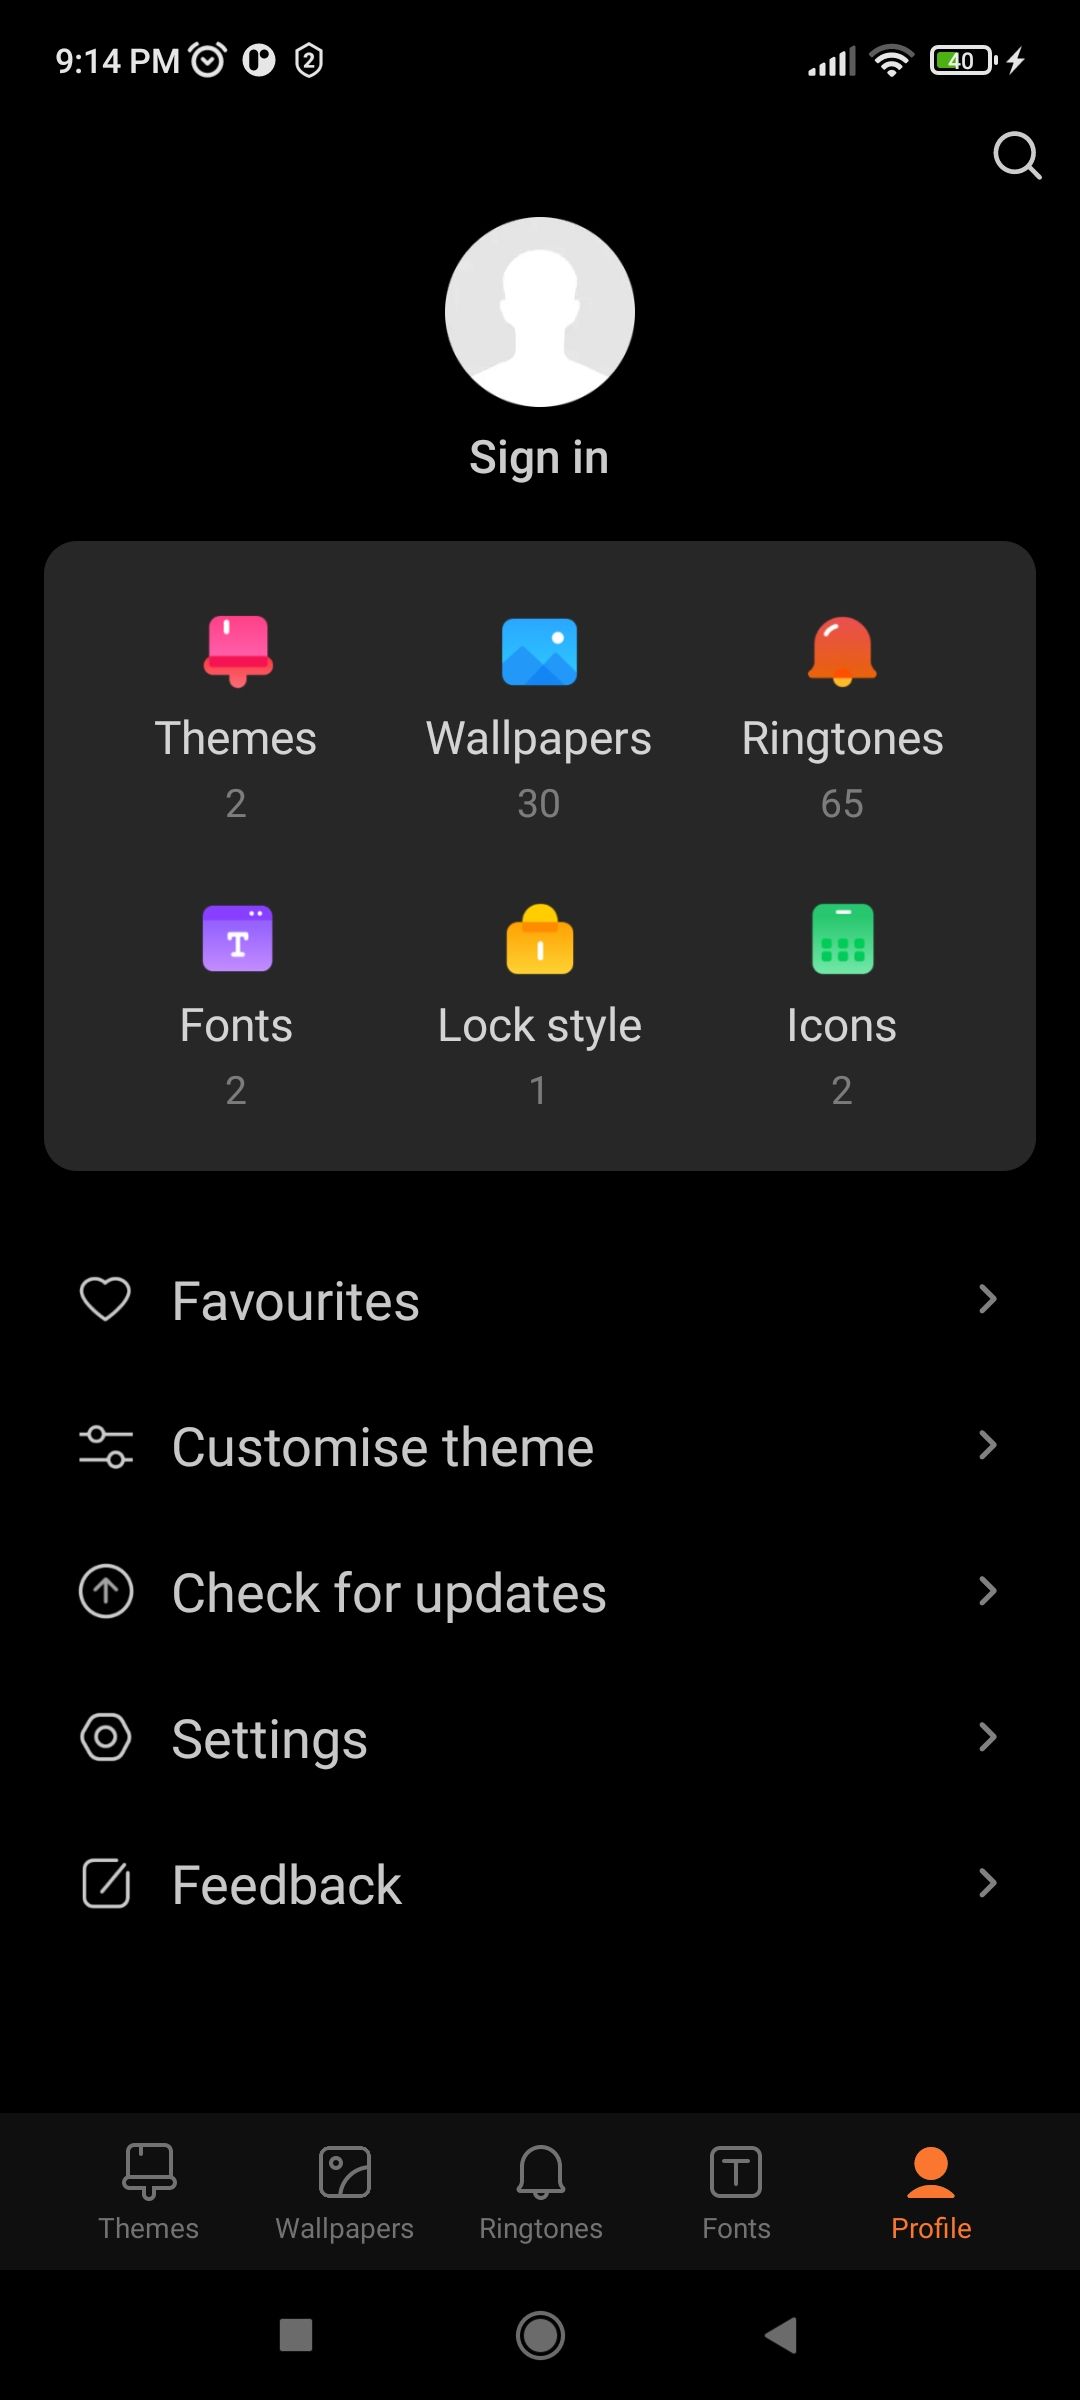 Settings Option in Profile Page of Themes App